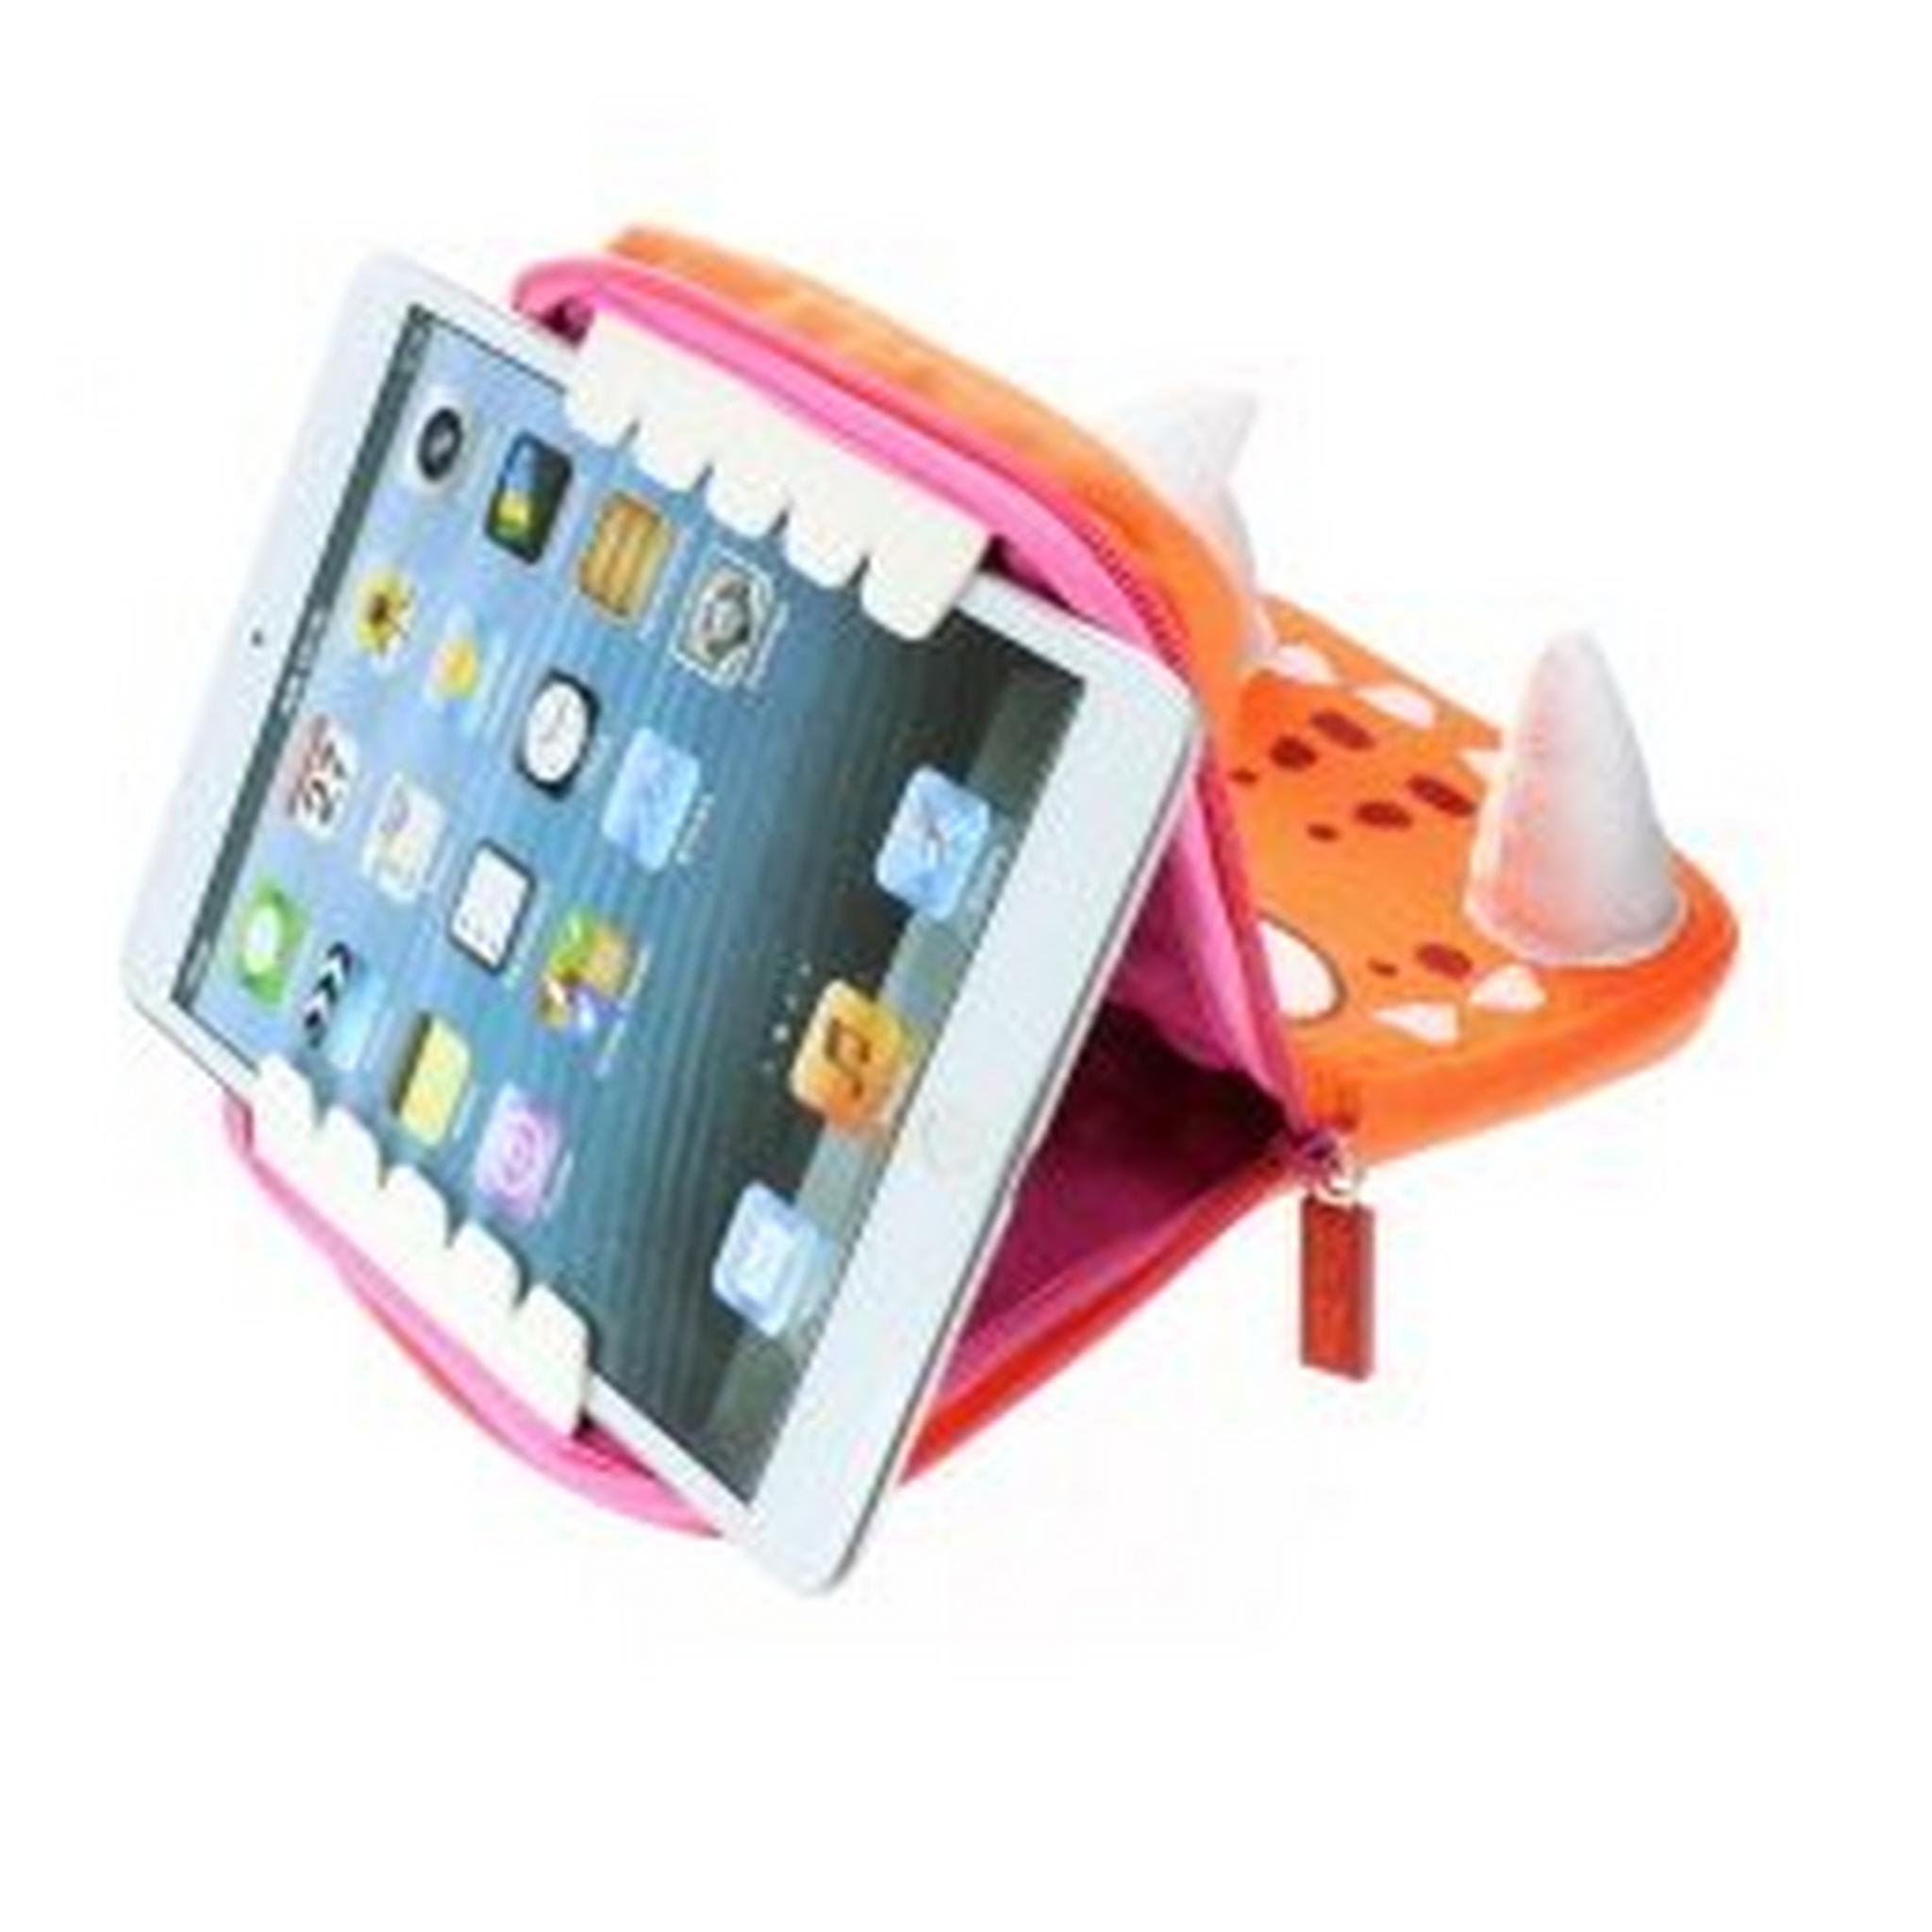 TabZoo Universal Tablet Sleeve with Built-in Stand and Earphone Cable Tidy for 7-8 tablets Triceratops